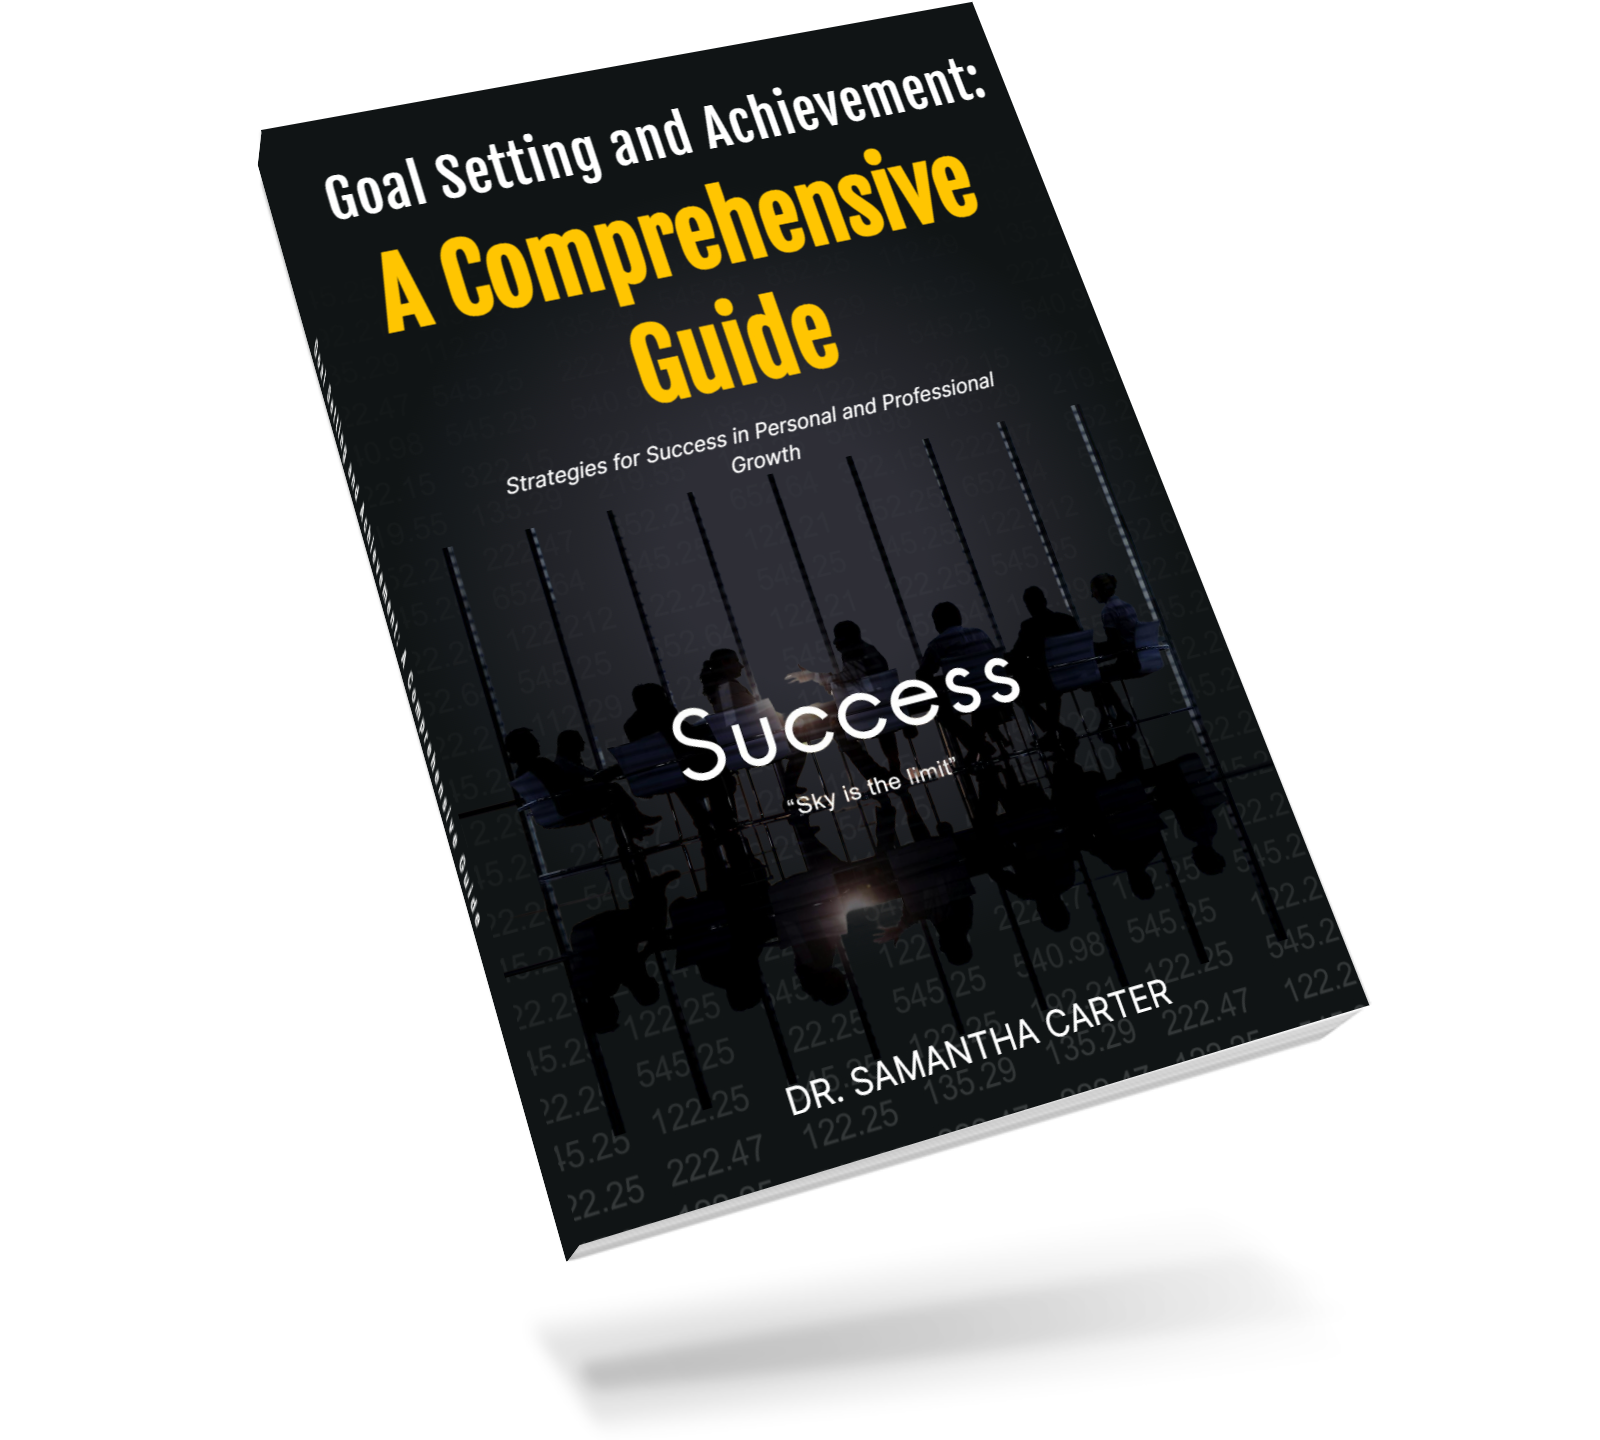 668be25329566_Goal_Setting_and_Achievement_A_Comprehensive_Guide.png